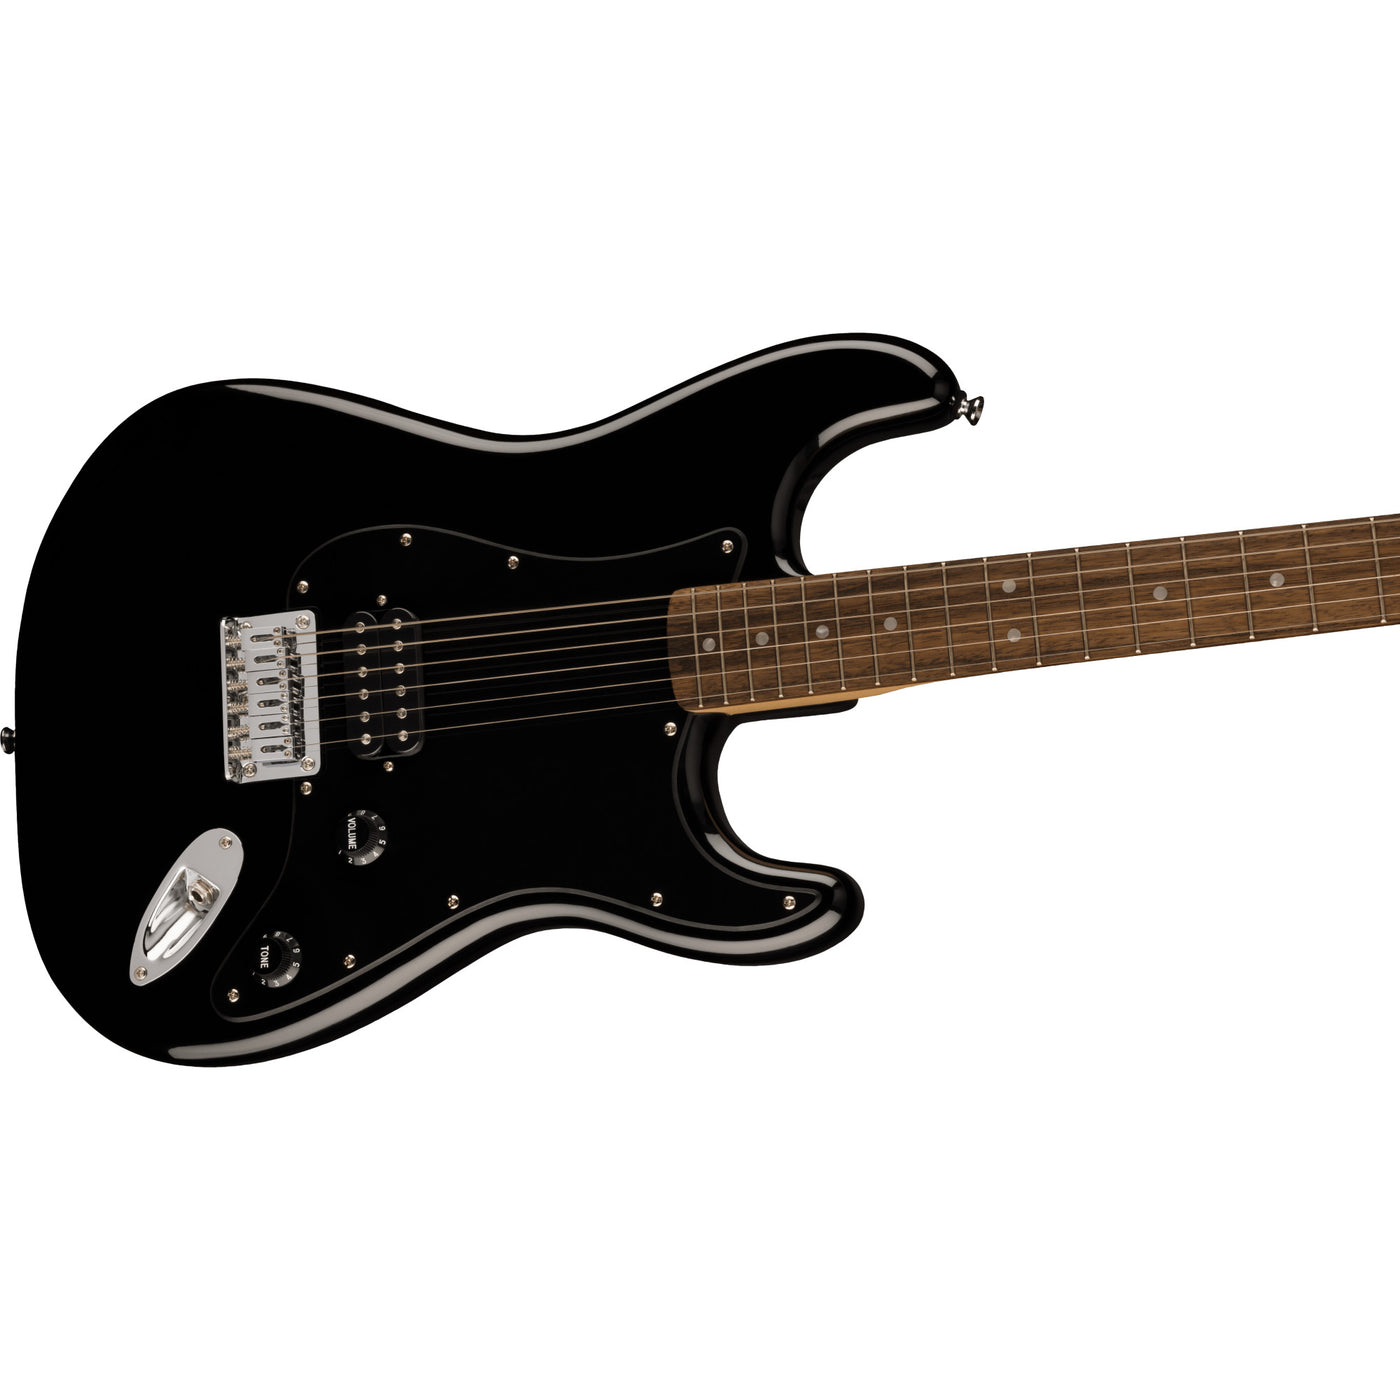 Squier Sonic Stratocaster HT H Electric Guitar, Black (0373301506)